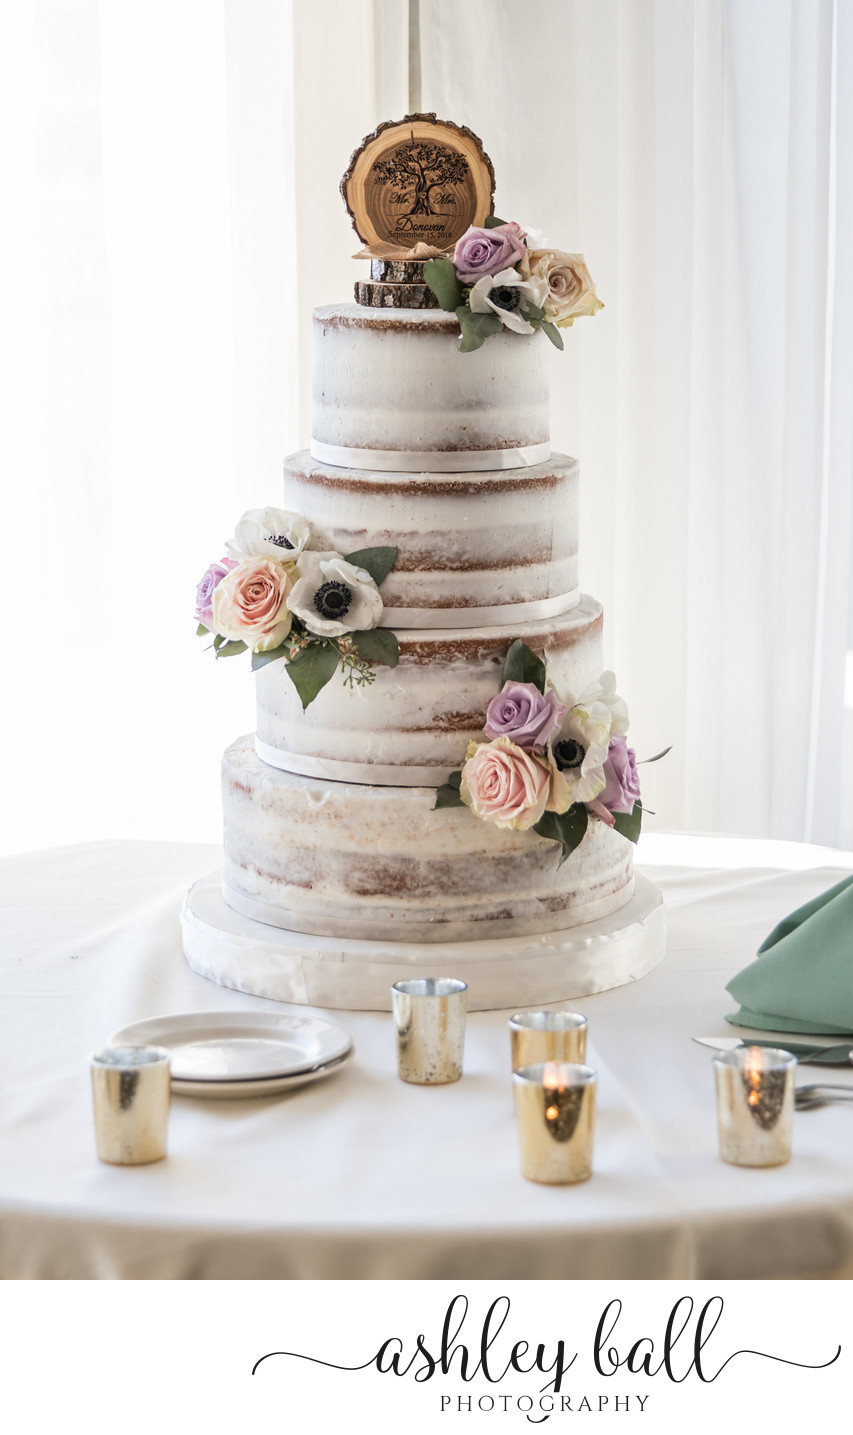 Naked Wedding Cake at Scott's Seafood on The River